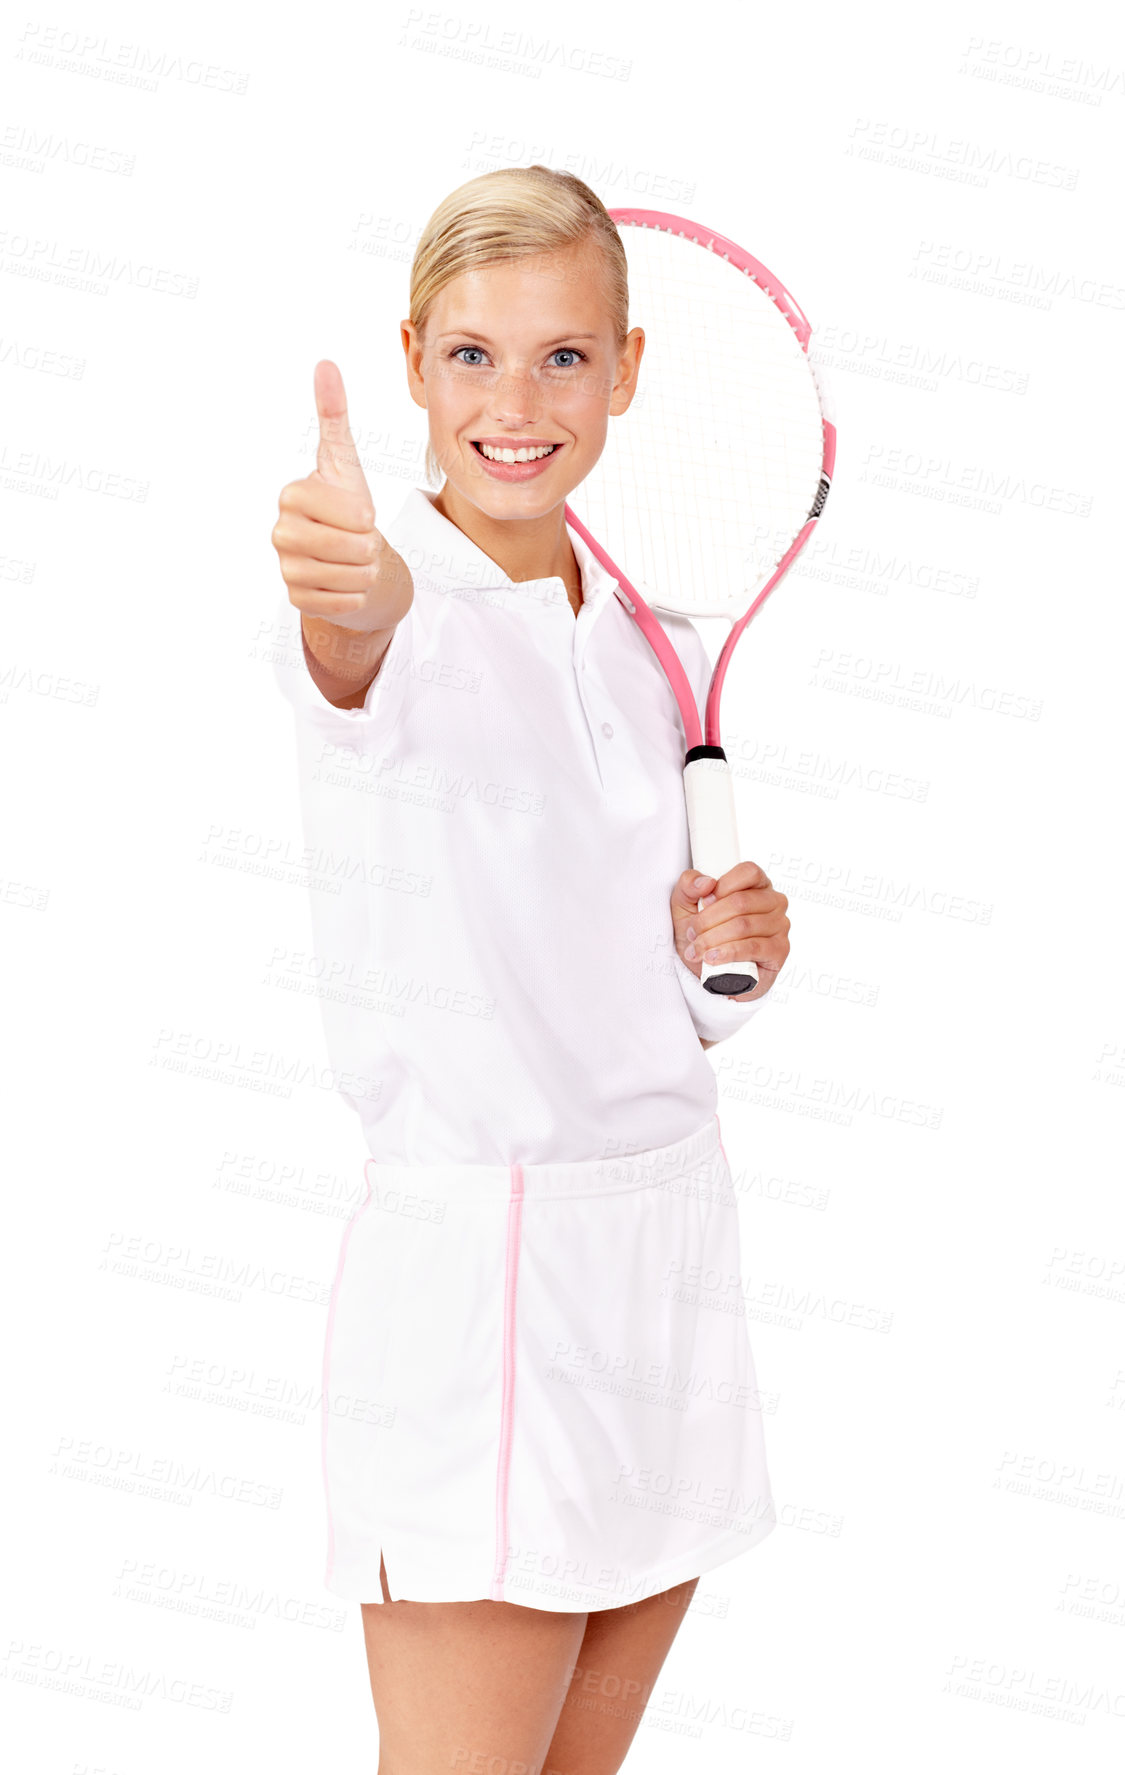 Buy stock photo Portrait of a positive looking young woman showing you the "thumbs up" while holding her tennis racquet